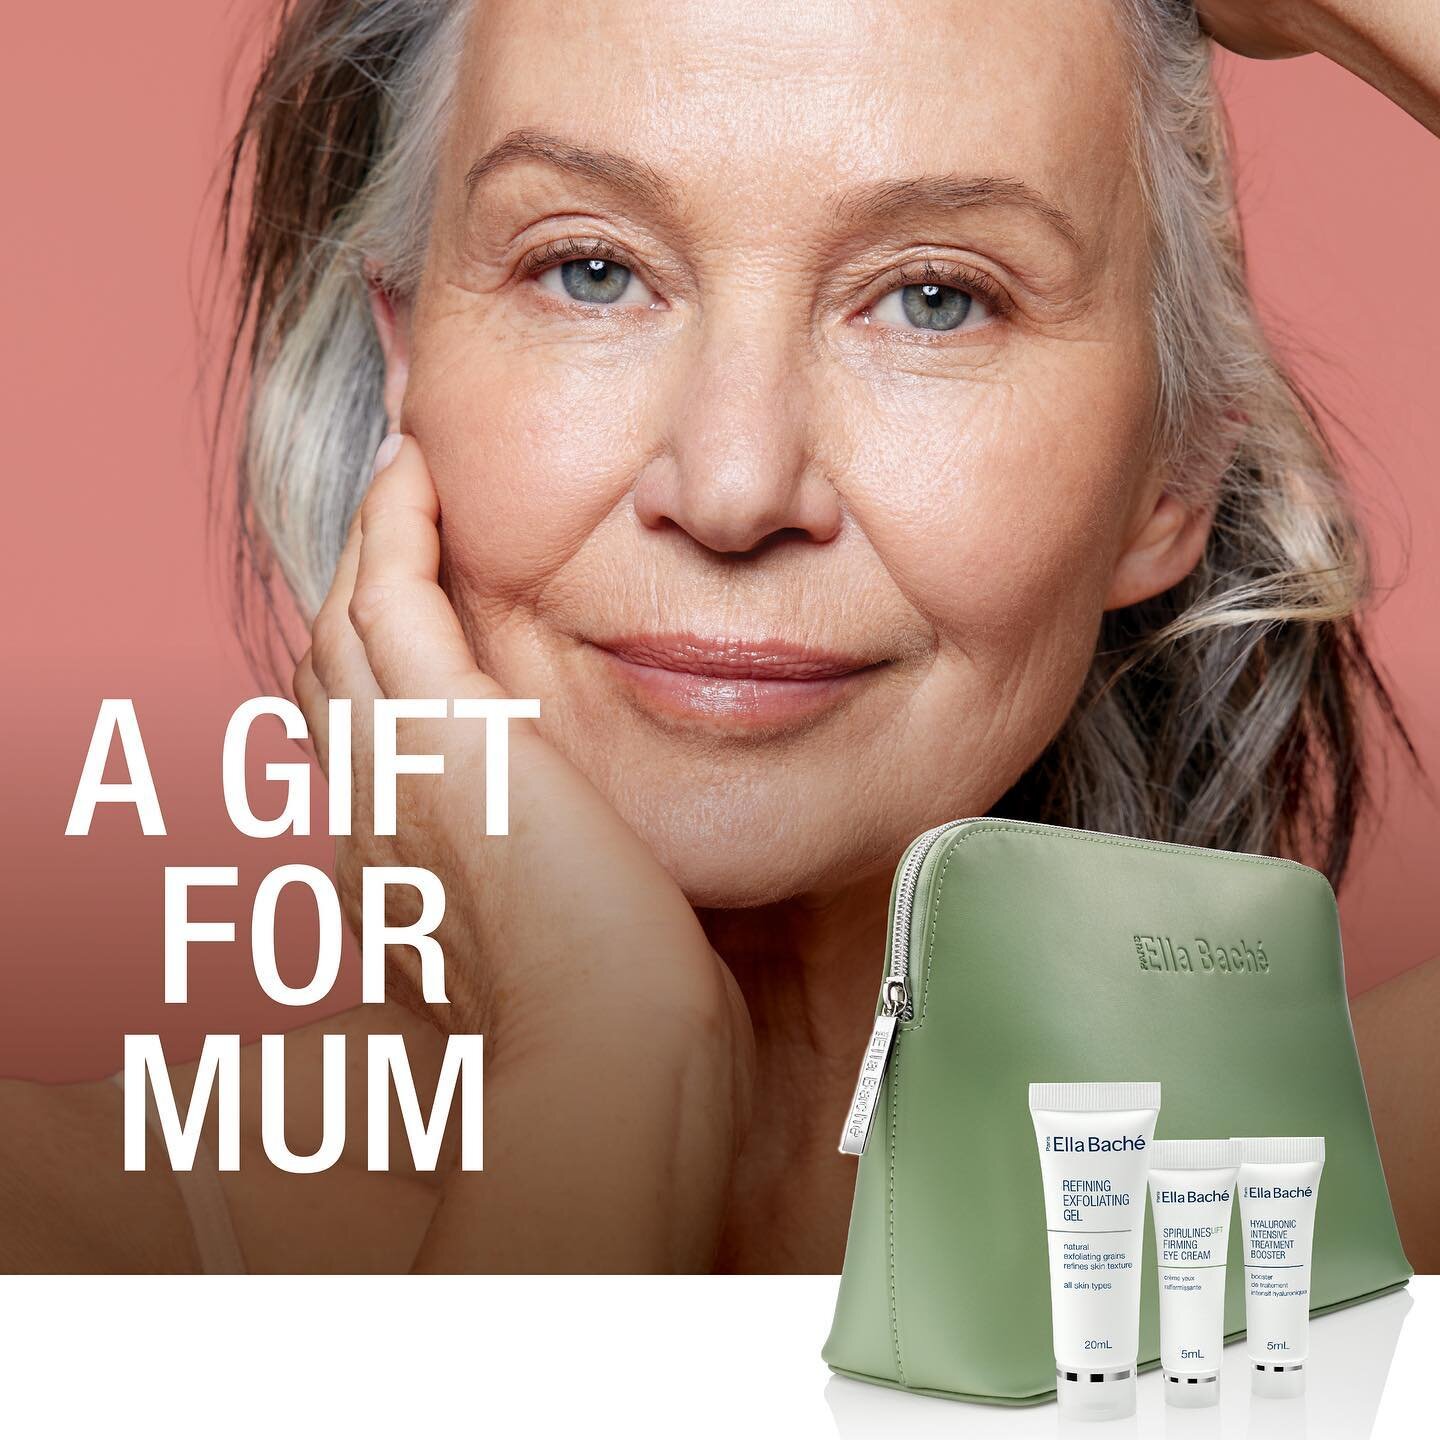 A special gift for mum this Mother&rsquo;s Day.

Receive a complimentary SpirulinesLift Beauty Collection when you purchase 2 or more Ella Bach&eacute; skincare products this month.

This complimentary Beauty collection contains: Refining Exfoliating